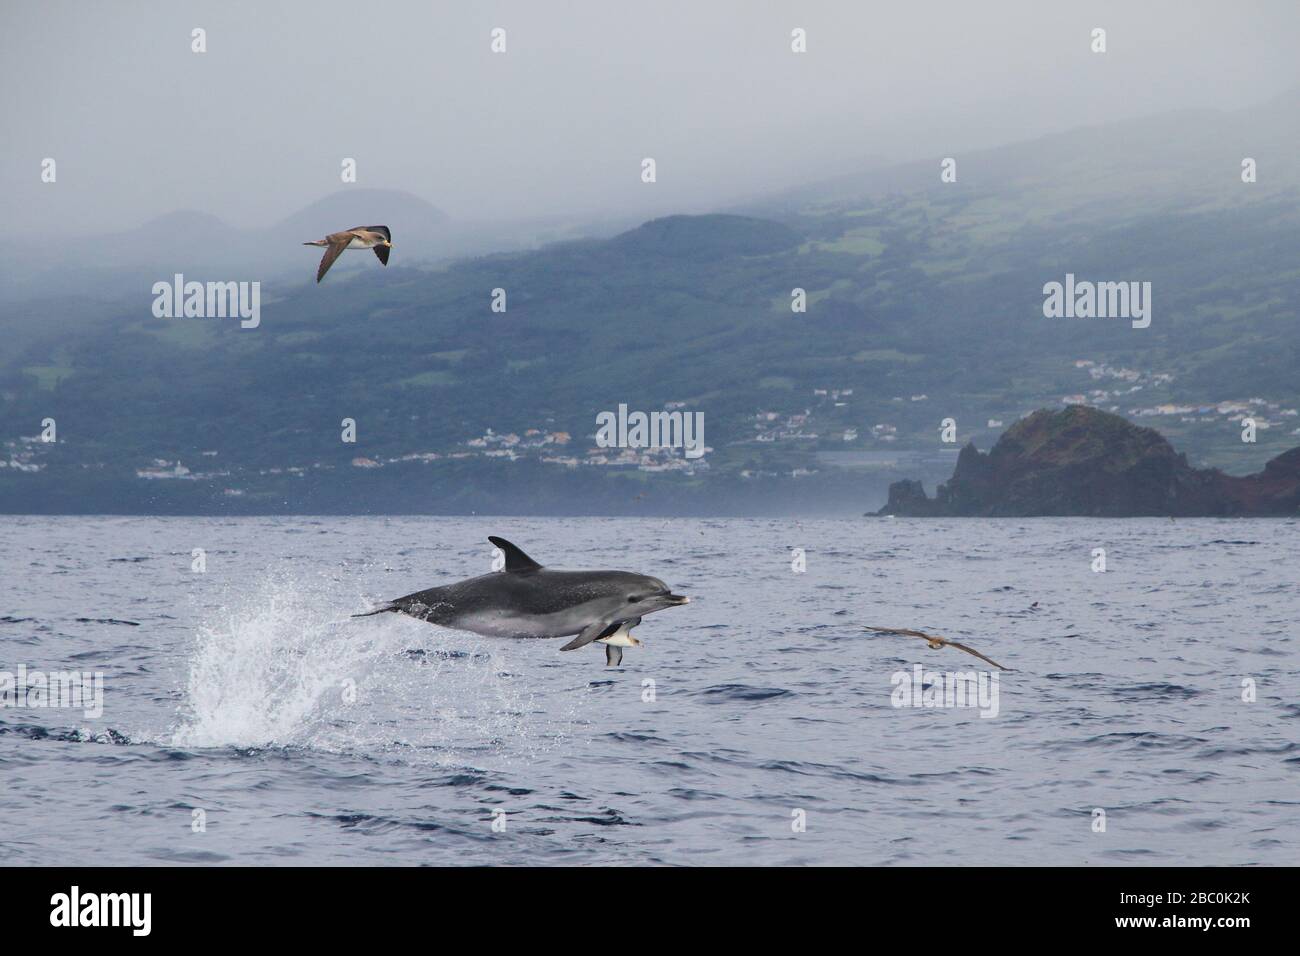 An Atlantic Spotted Dolphin (Stenella frontalis) jumping out of the water at the coast of Pico Island on the Azores, Portugal. Stock Photo